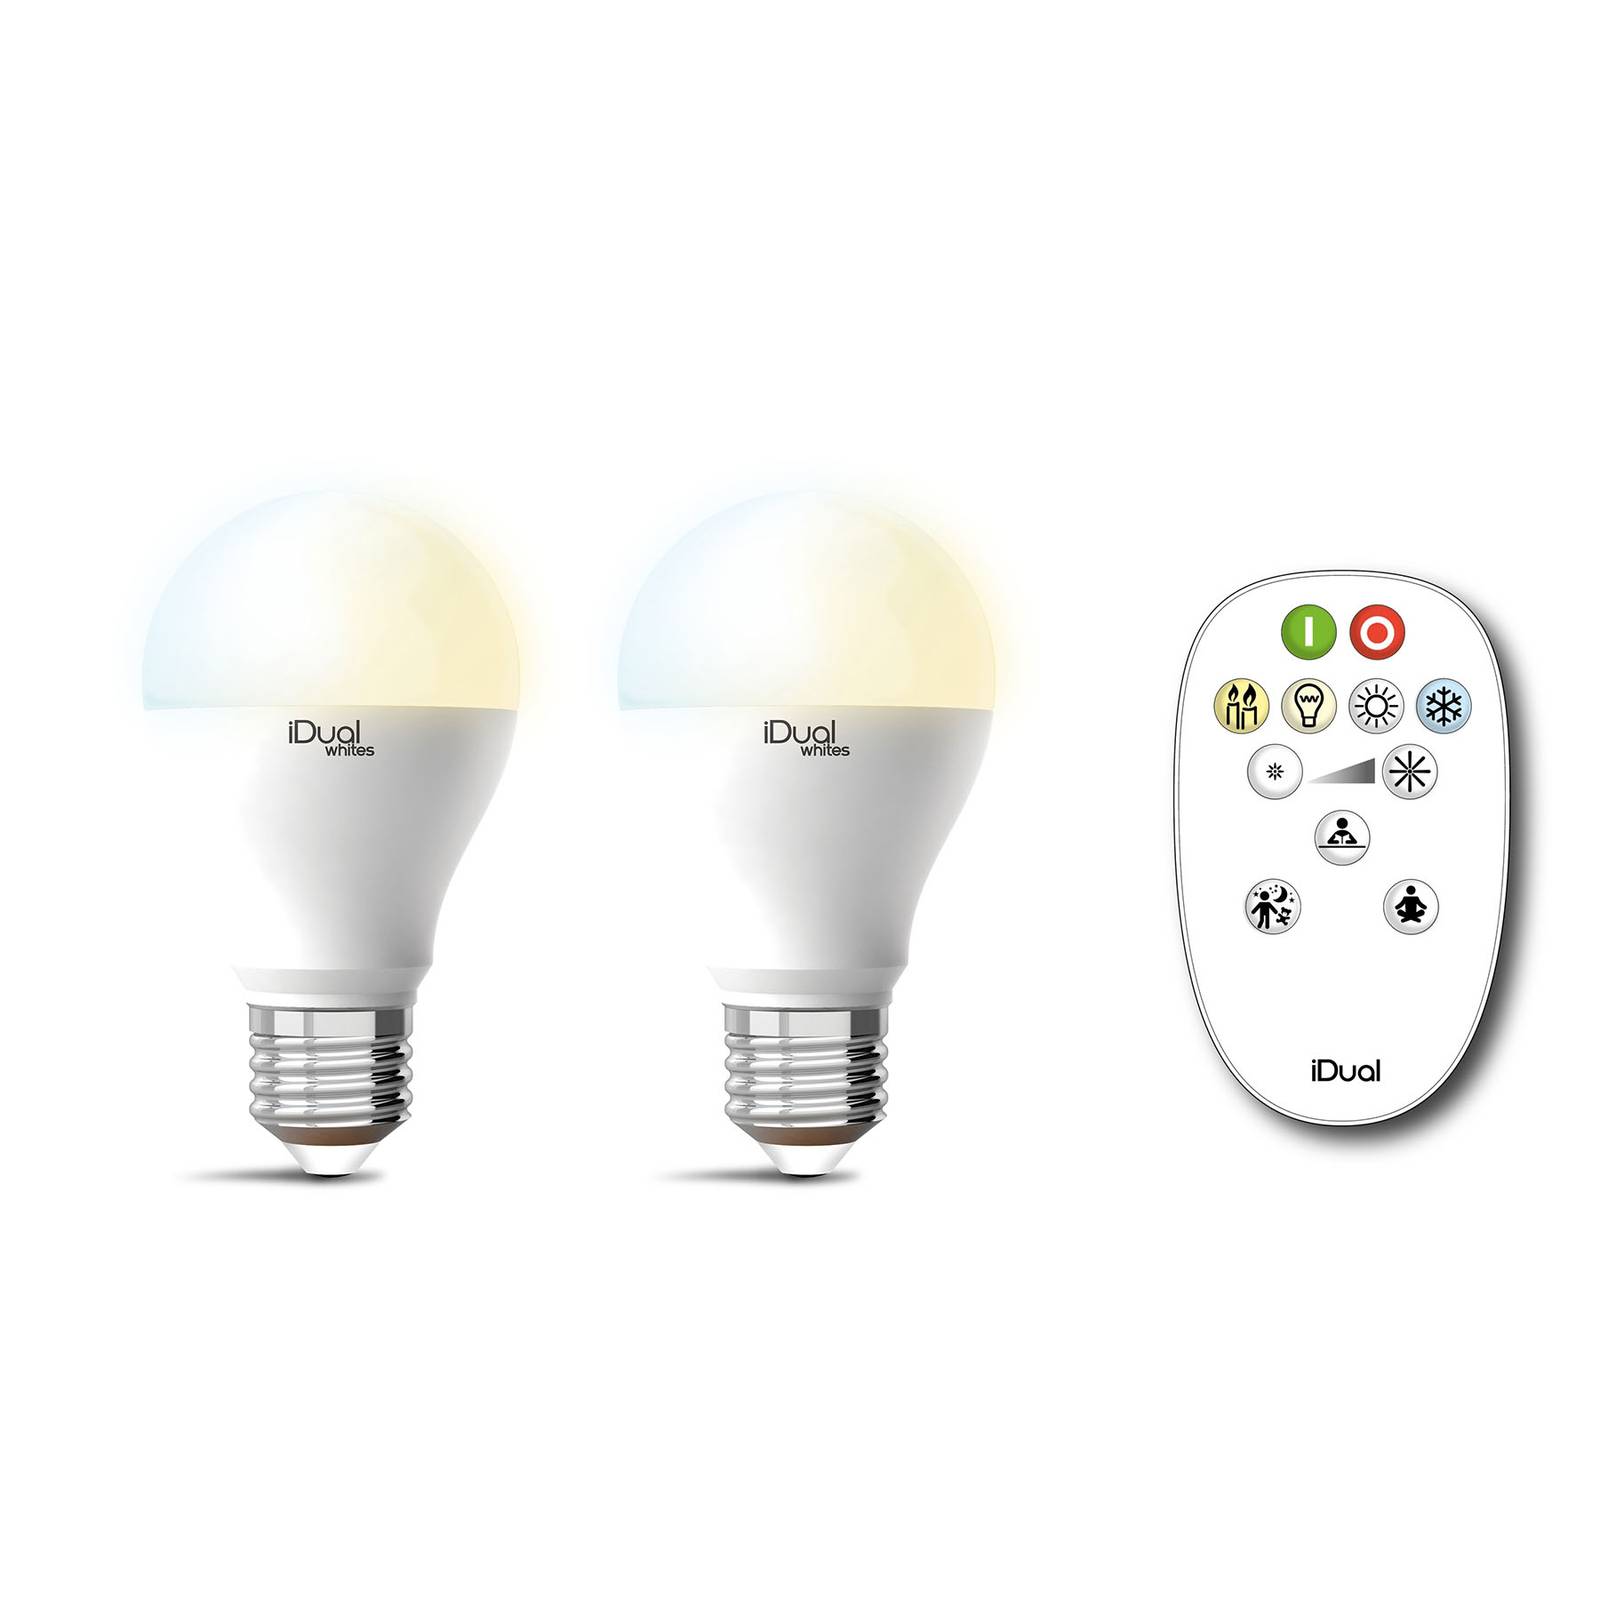 Wreed oud paneel iDual Whites E27 A60 10 W 2-pack, remote control | Lights.co.uk